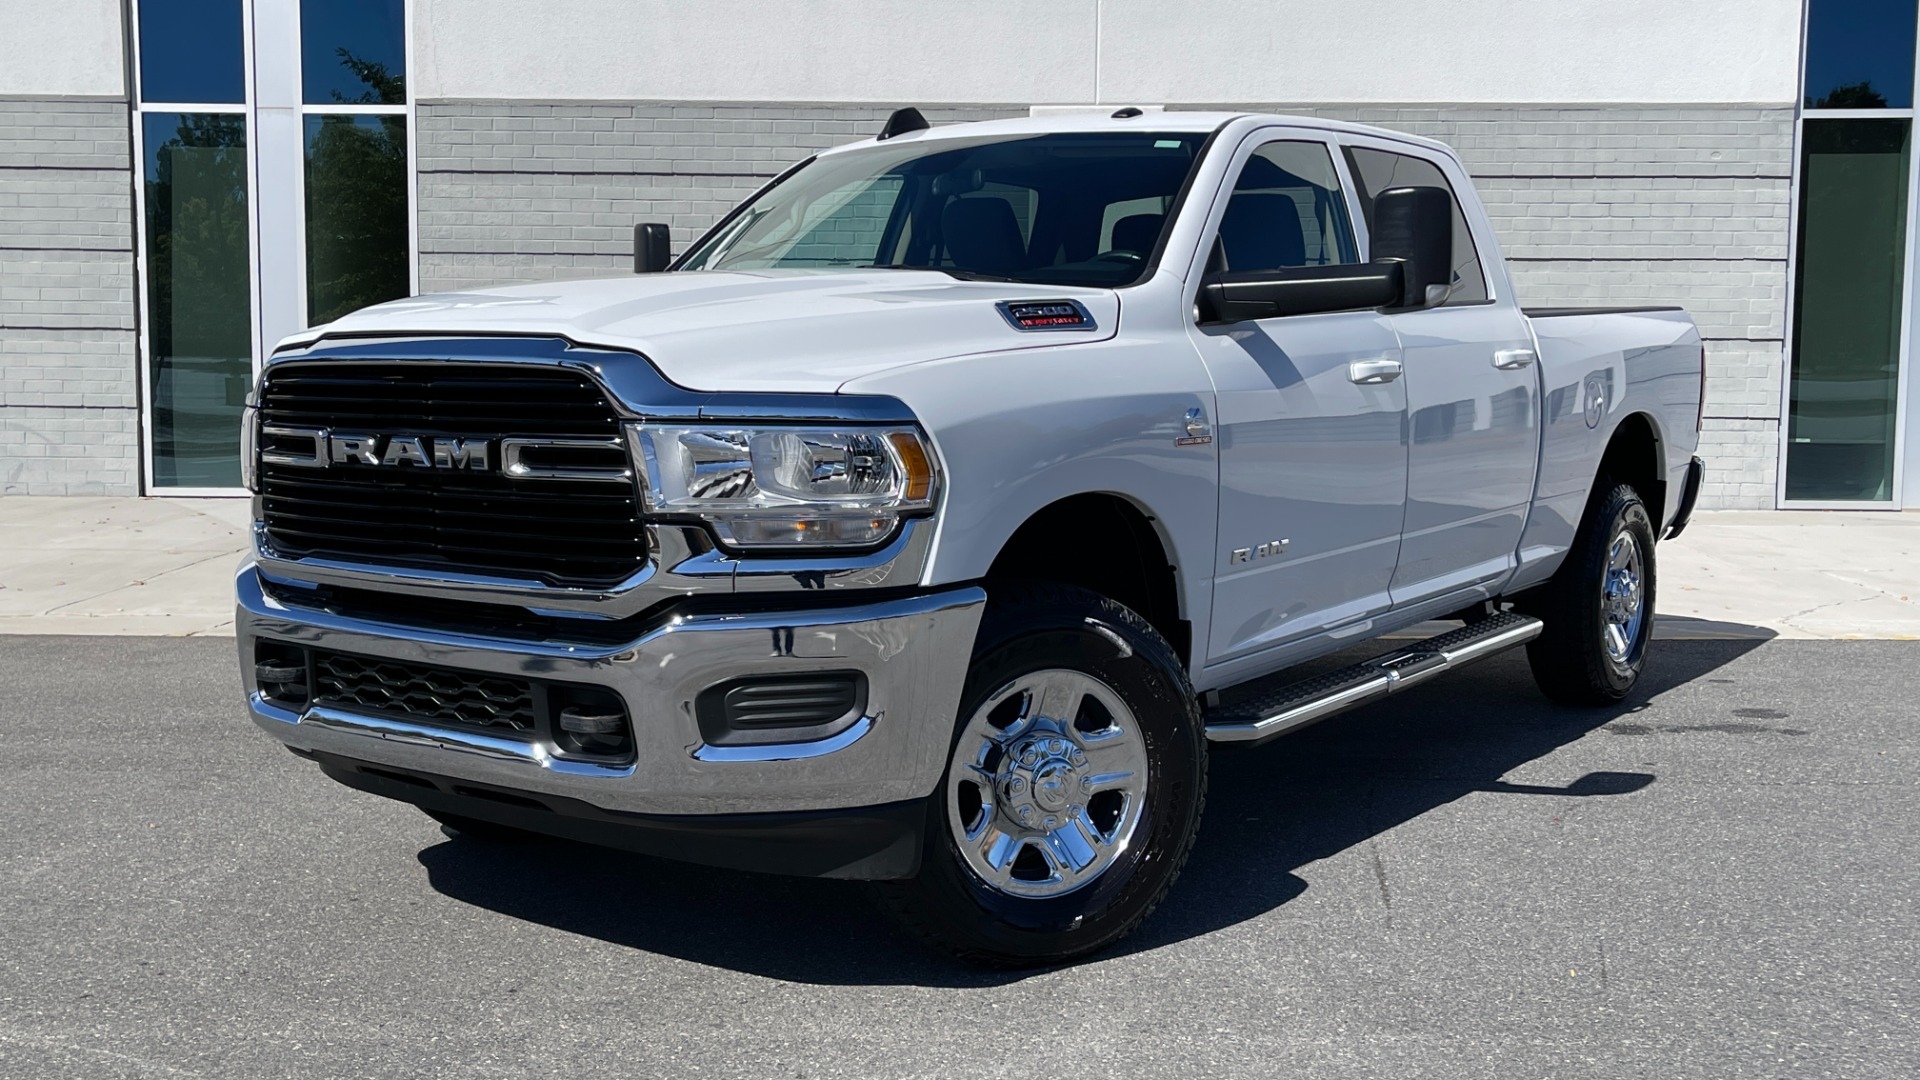 Used 2020 Ram 2500 BIG HORN / 6.7 CUMMINS DIESEL / CREW CAB / 4WD / SIDE STEPS for sale $54,995 at Formula Imports in Charlotte NC 28227 1